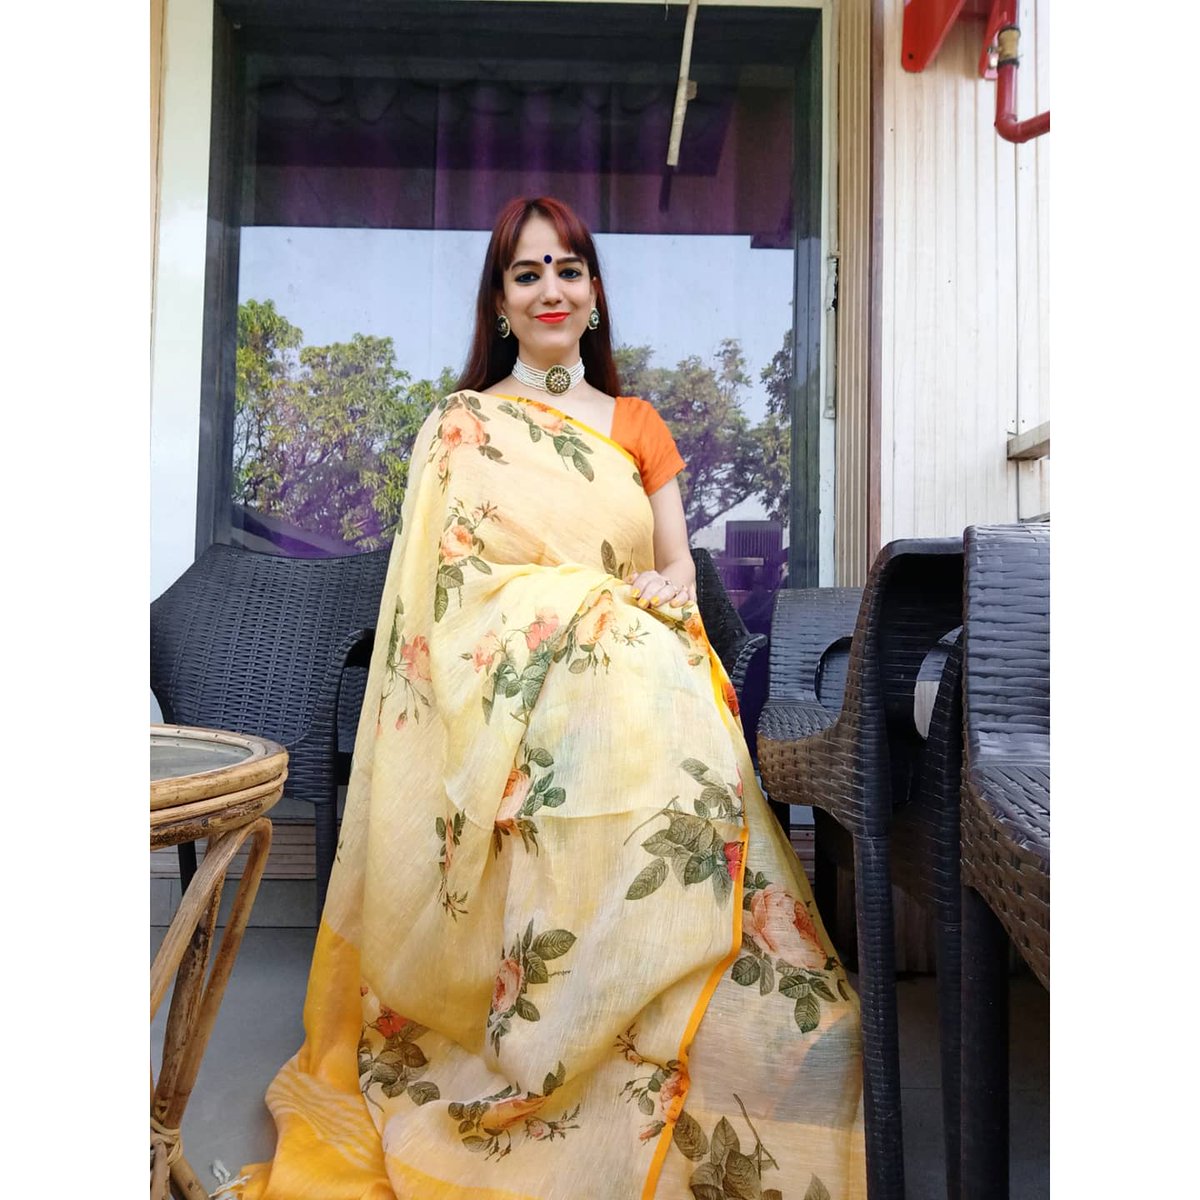 There is a lot more to life than Your thoughts and emotions,time to move from physiological space to life scape.
#india #indiansaree #chettinadcotton #pattusaree #weavesofindia #georgettesaree #weddingsaree #sareelover #pankhbyrashmijaiswal #silk #sareestyle #indianwear